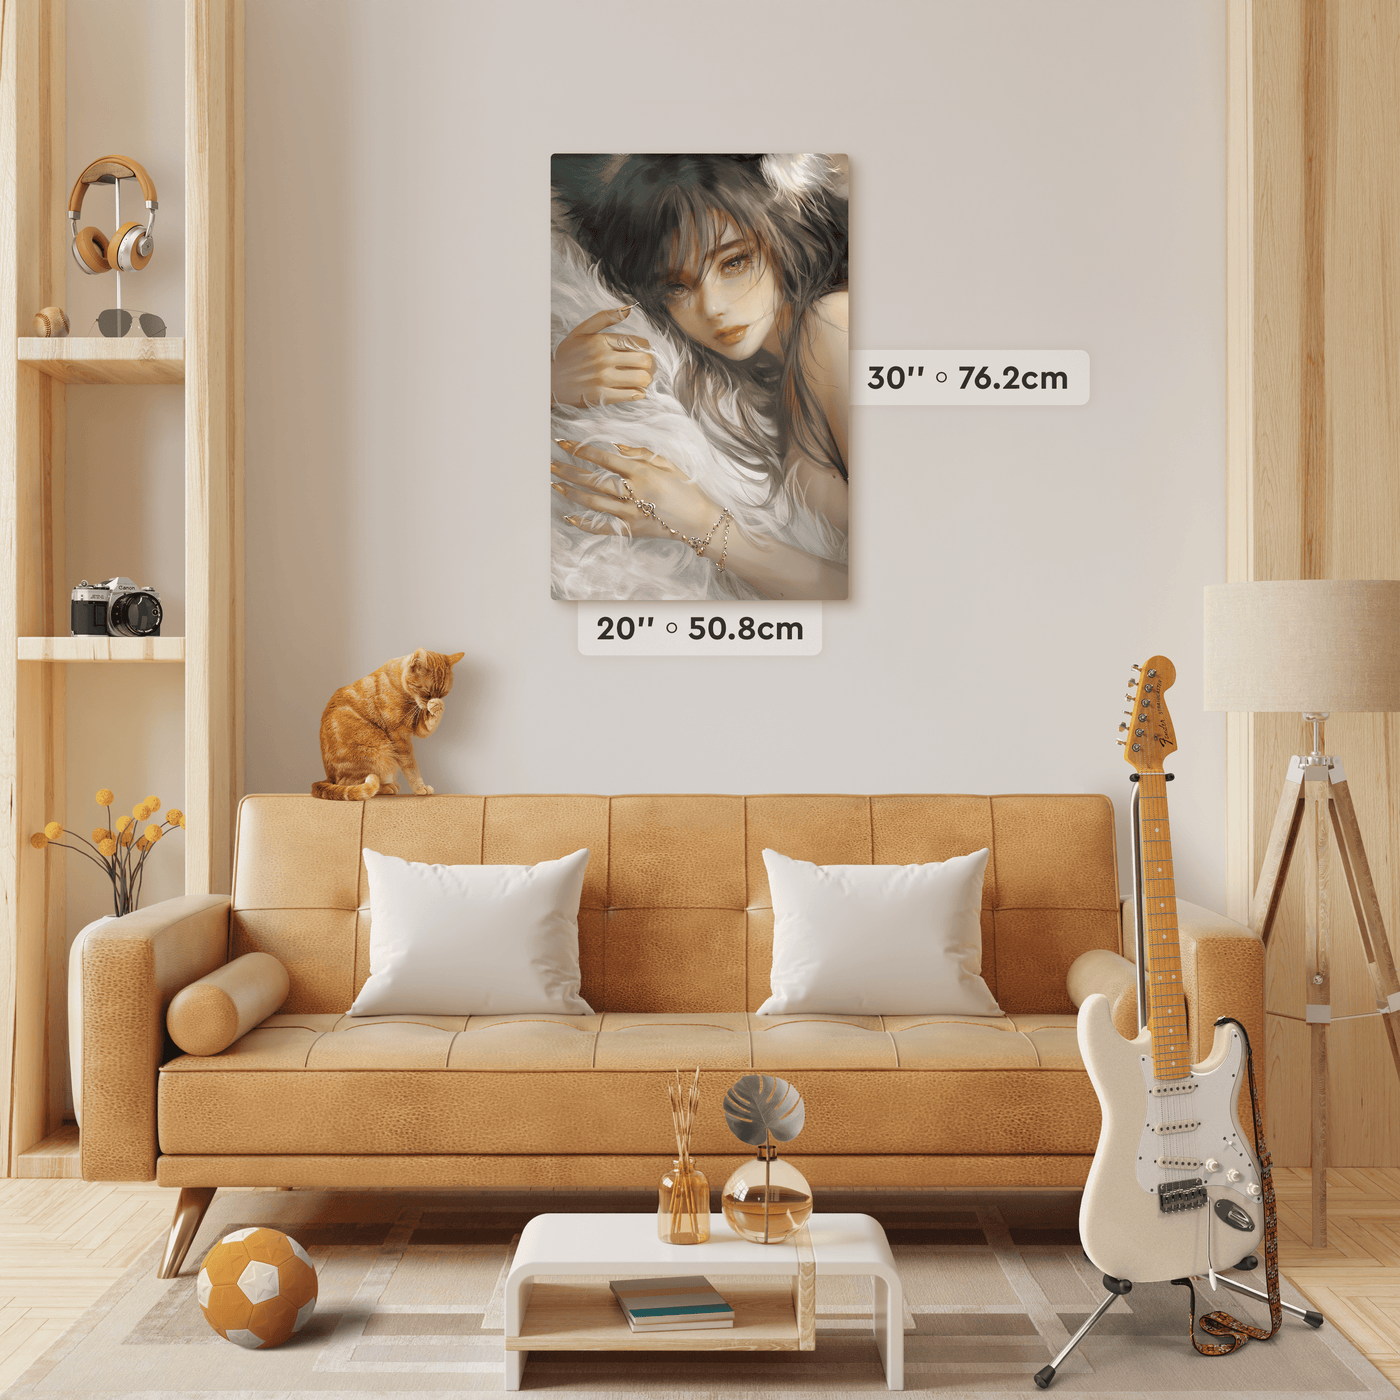 Large Custom Print on Metal 20''x30'' in size in living room interior.